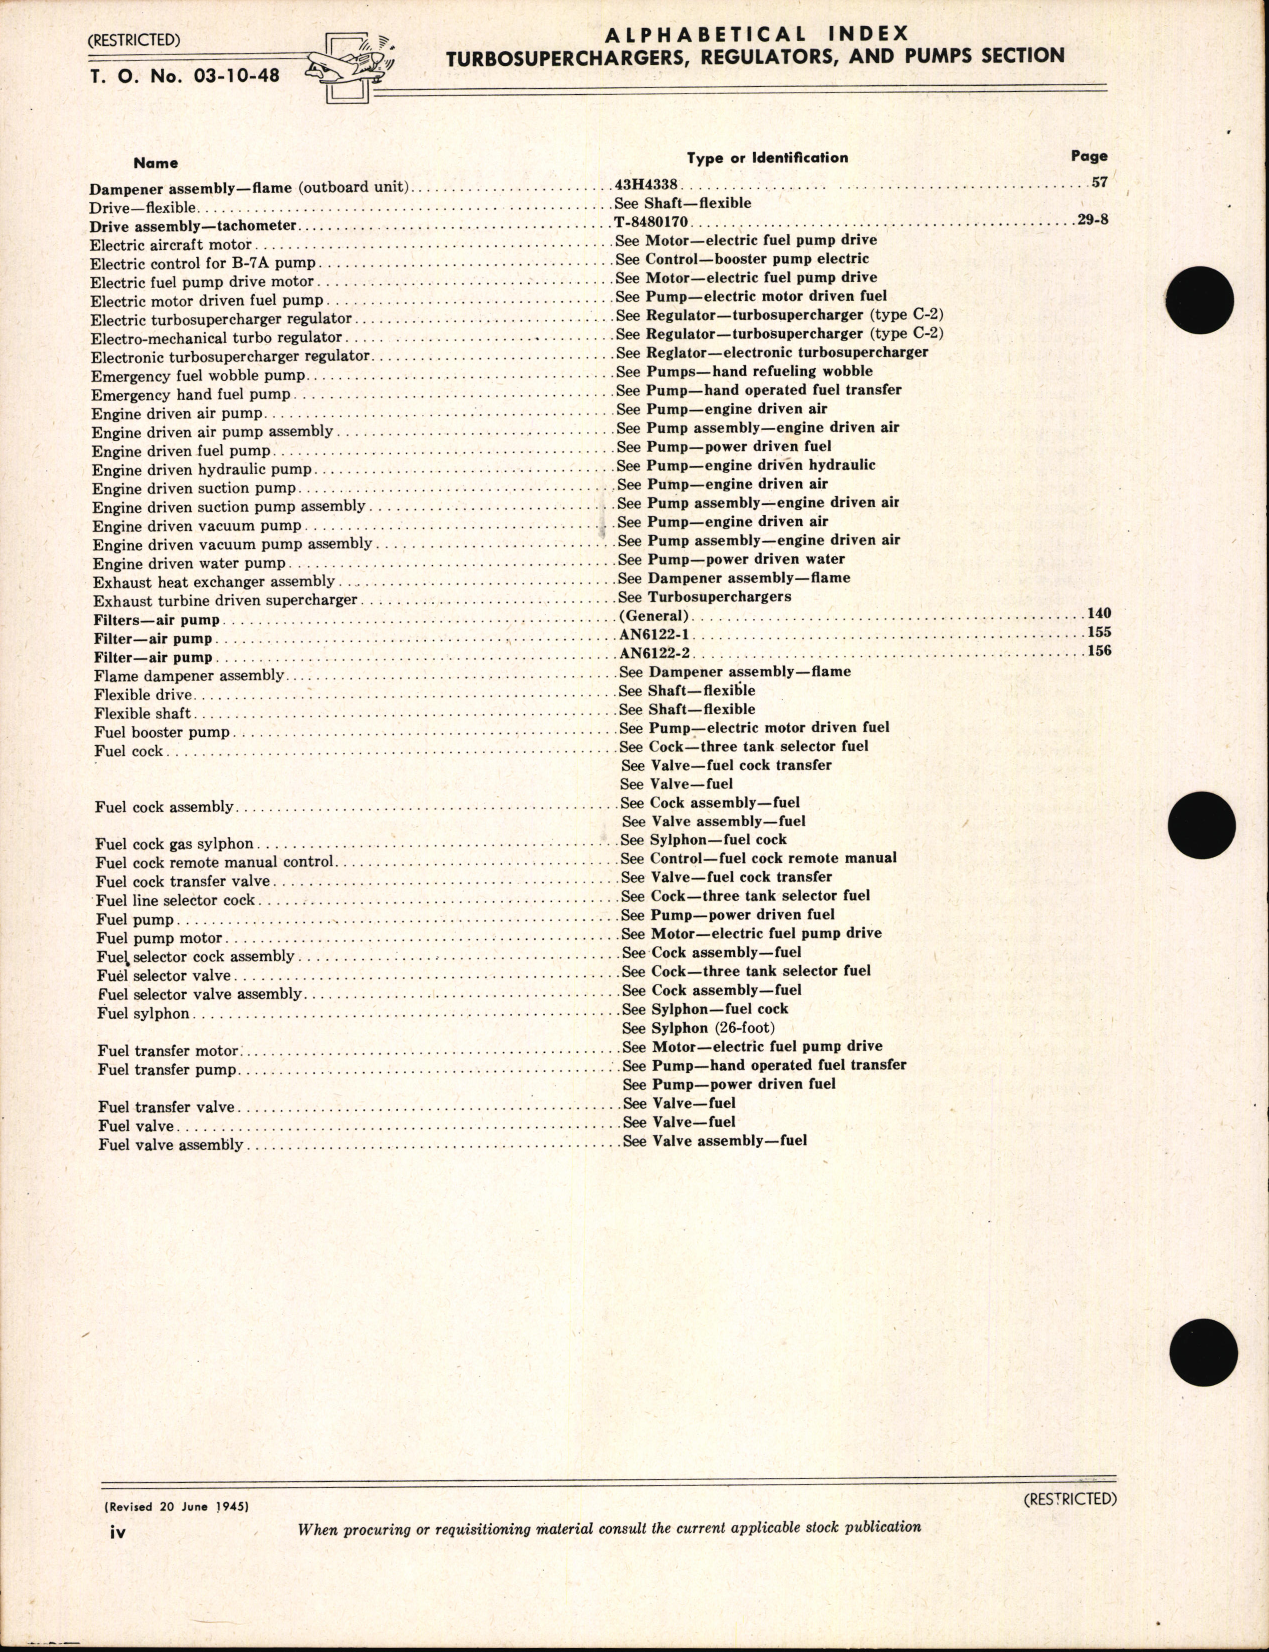 Sample page 6 from AirCorps Library document: Index of Army-Navy Aeronautical Equipment - Turbosuperchargers and Regulators, Pumps, and Pump Accessories